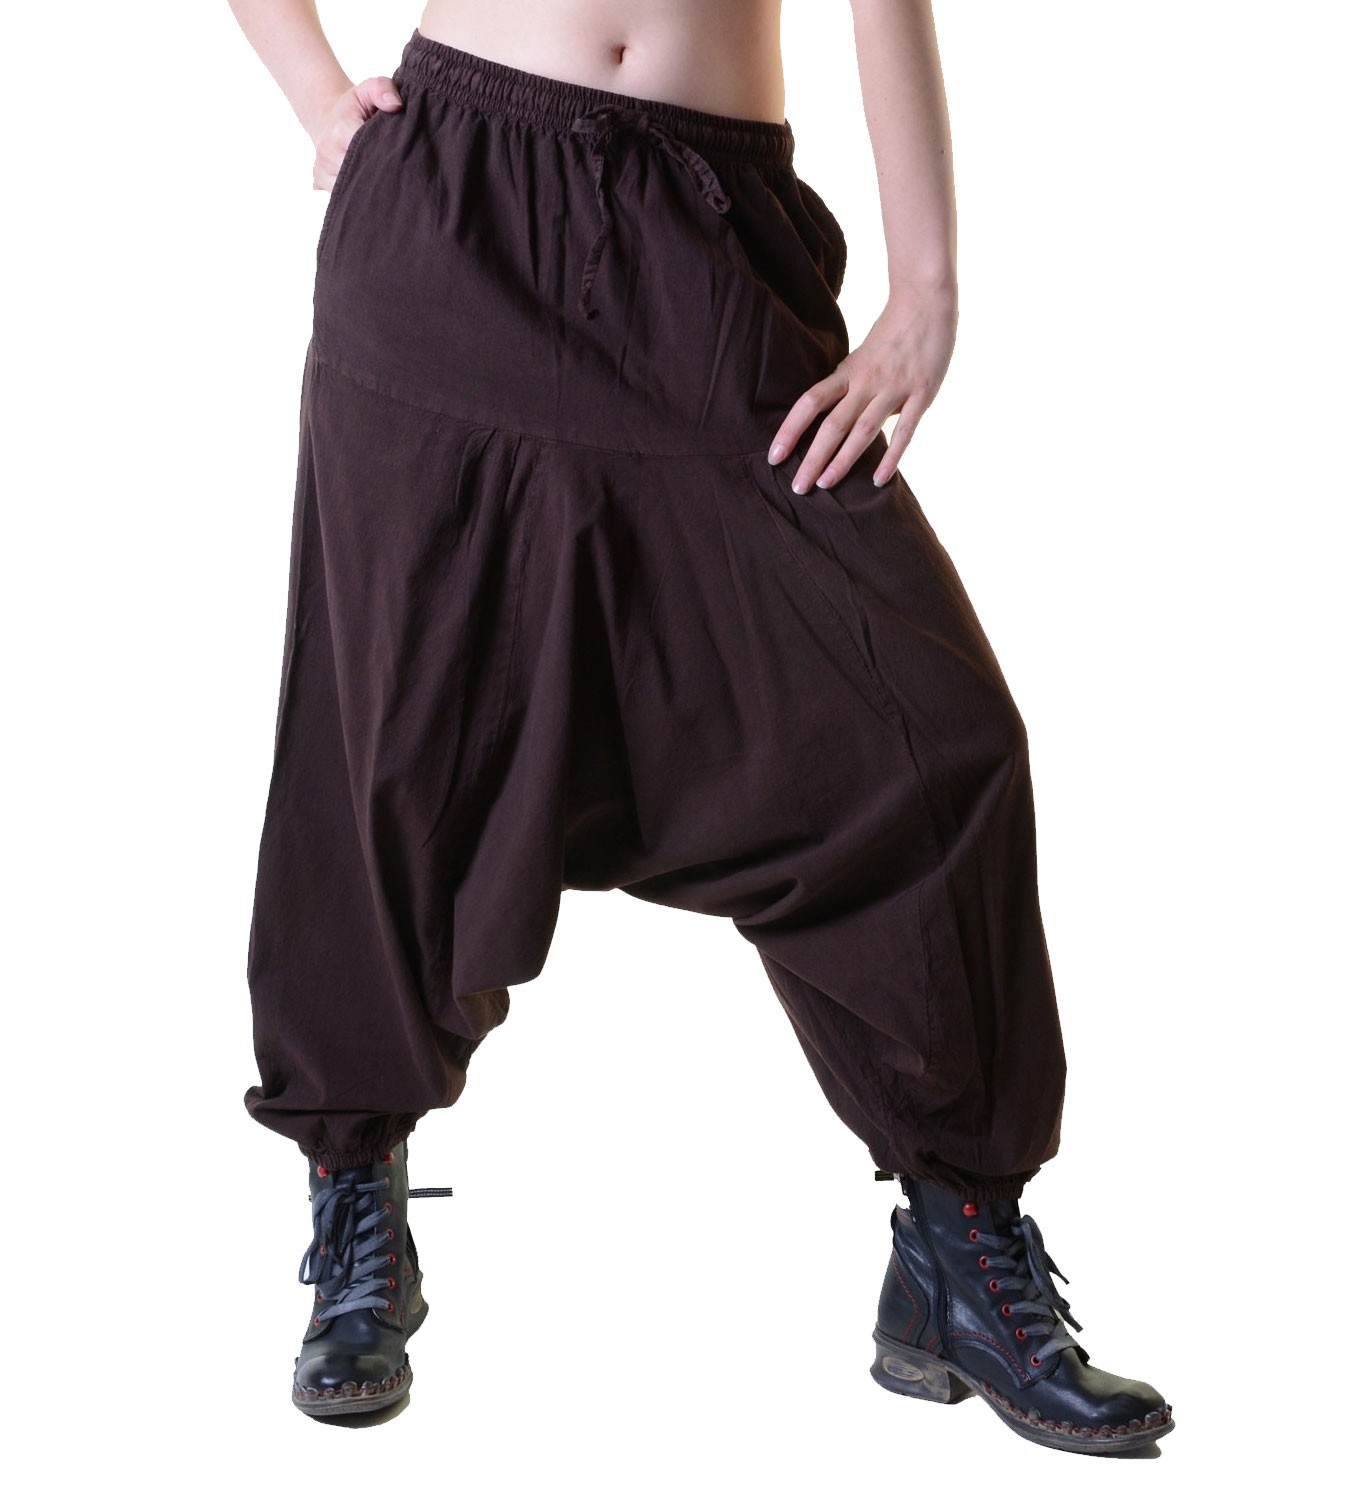 Sarouel pants Baggy trousers in Harem Style aladin Medieval | eBay